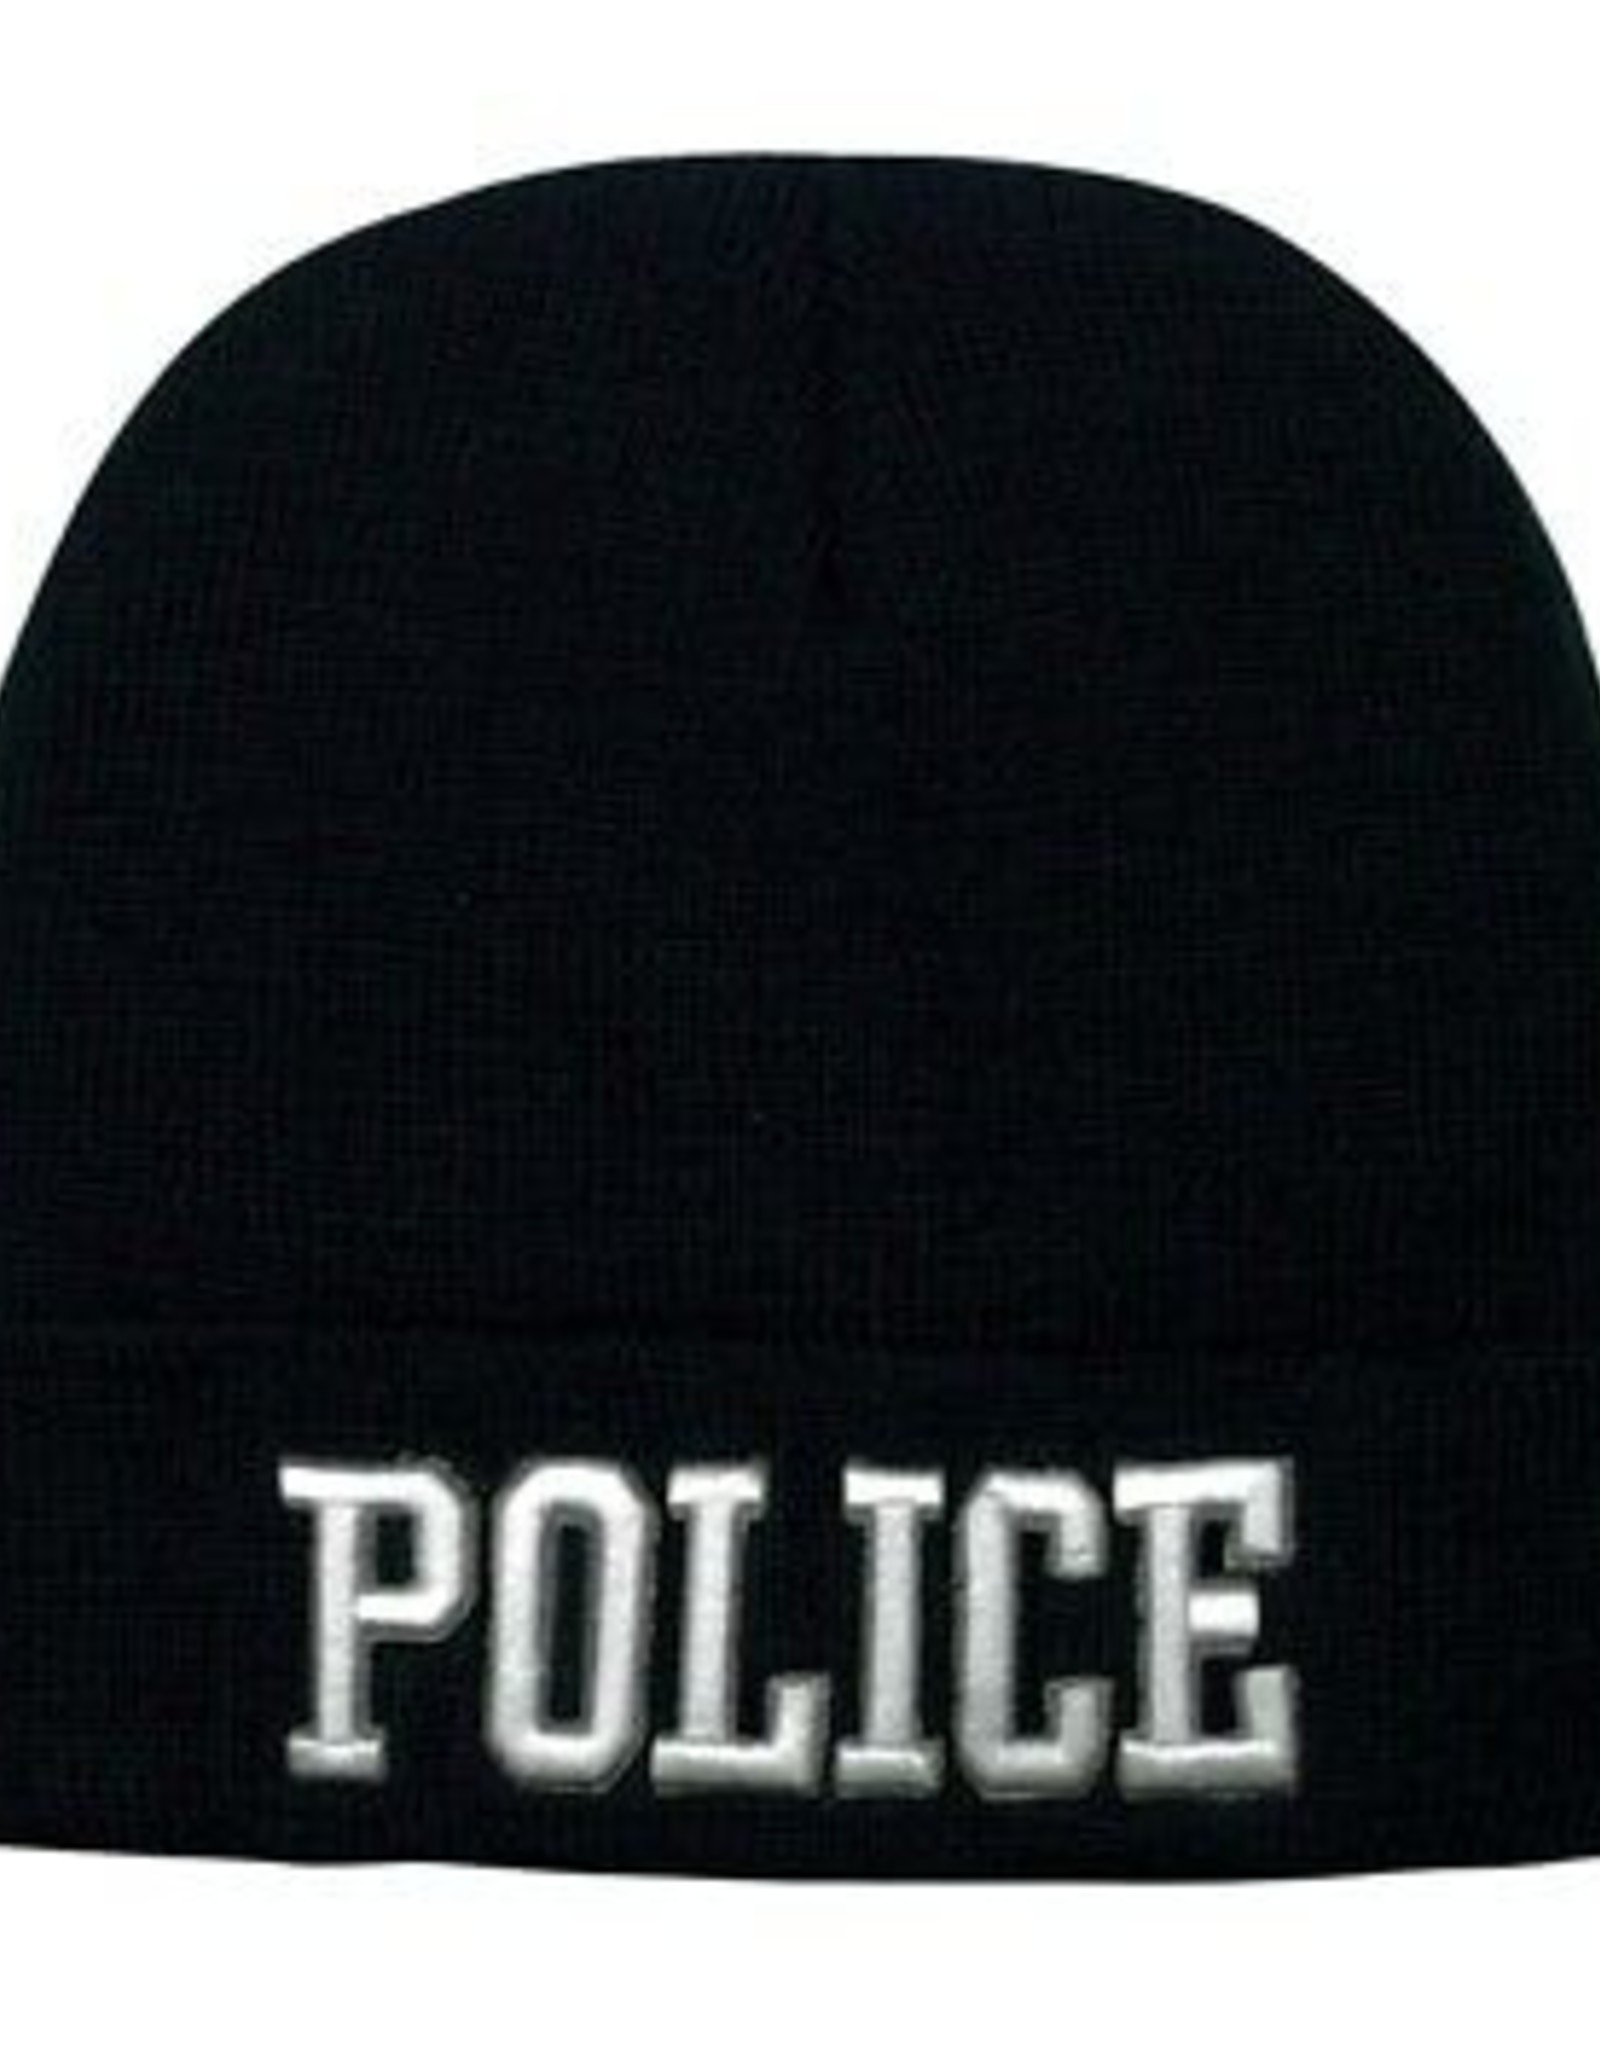 ROTHCO ROTHCO DELUXE EMBROIDERED WATCH CAP POLICE